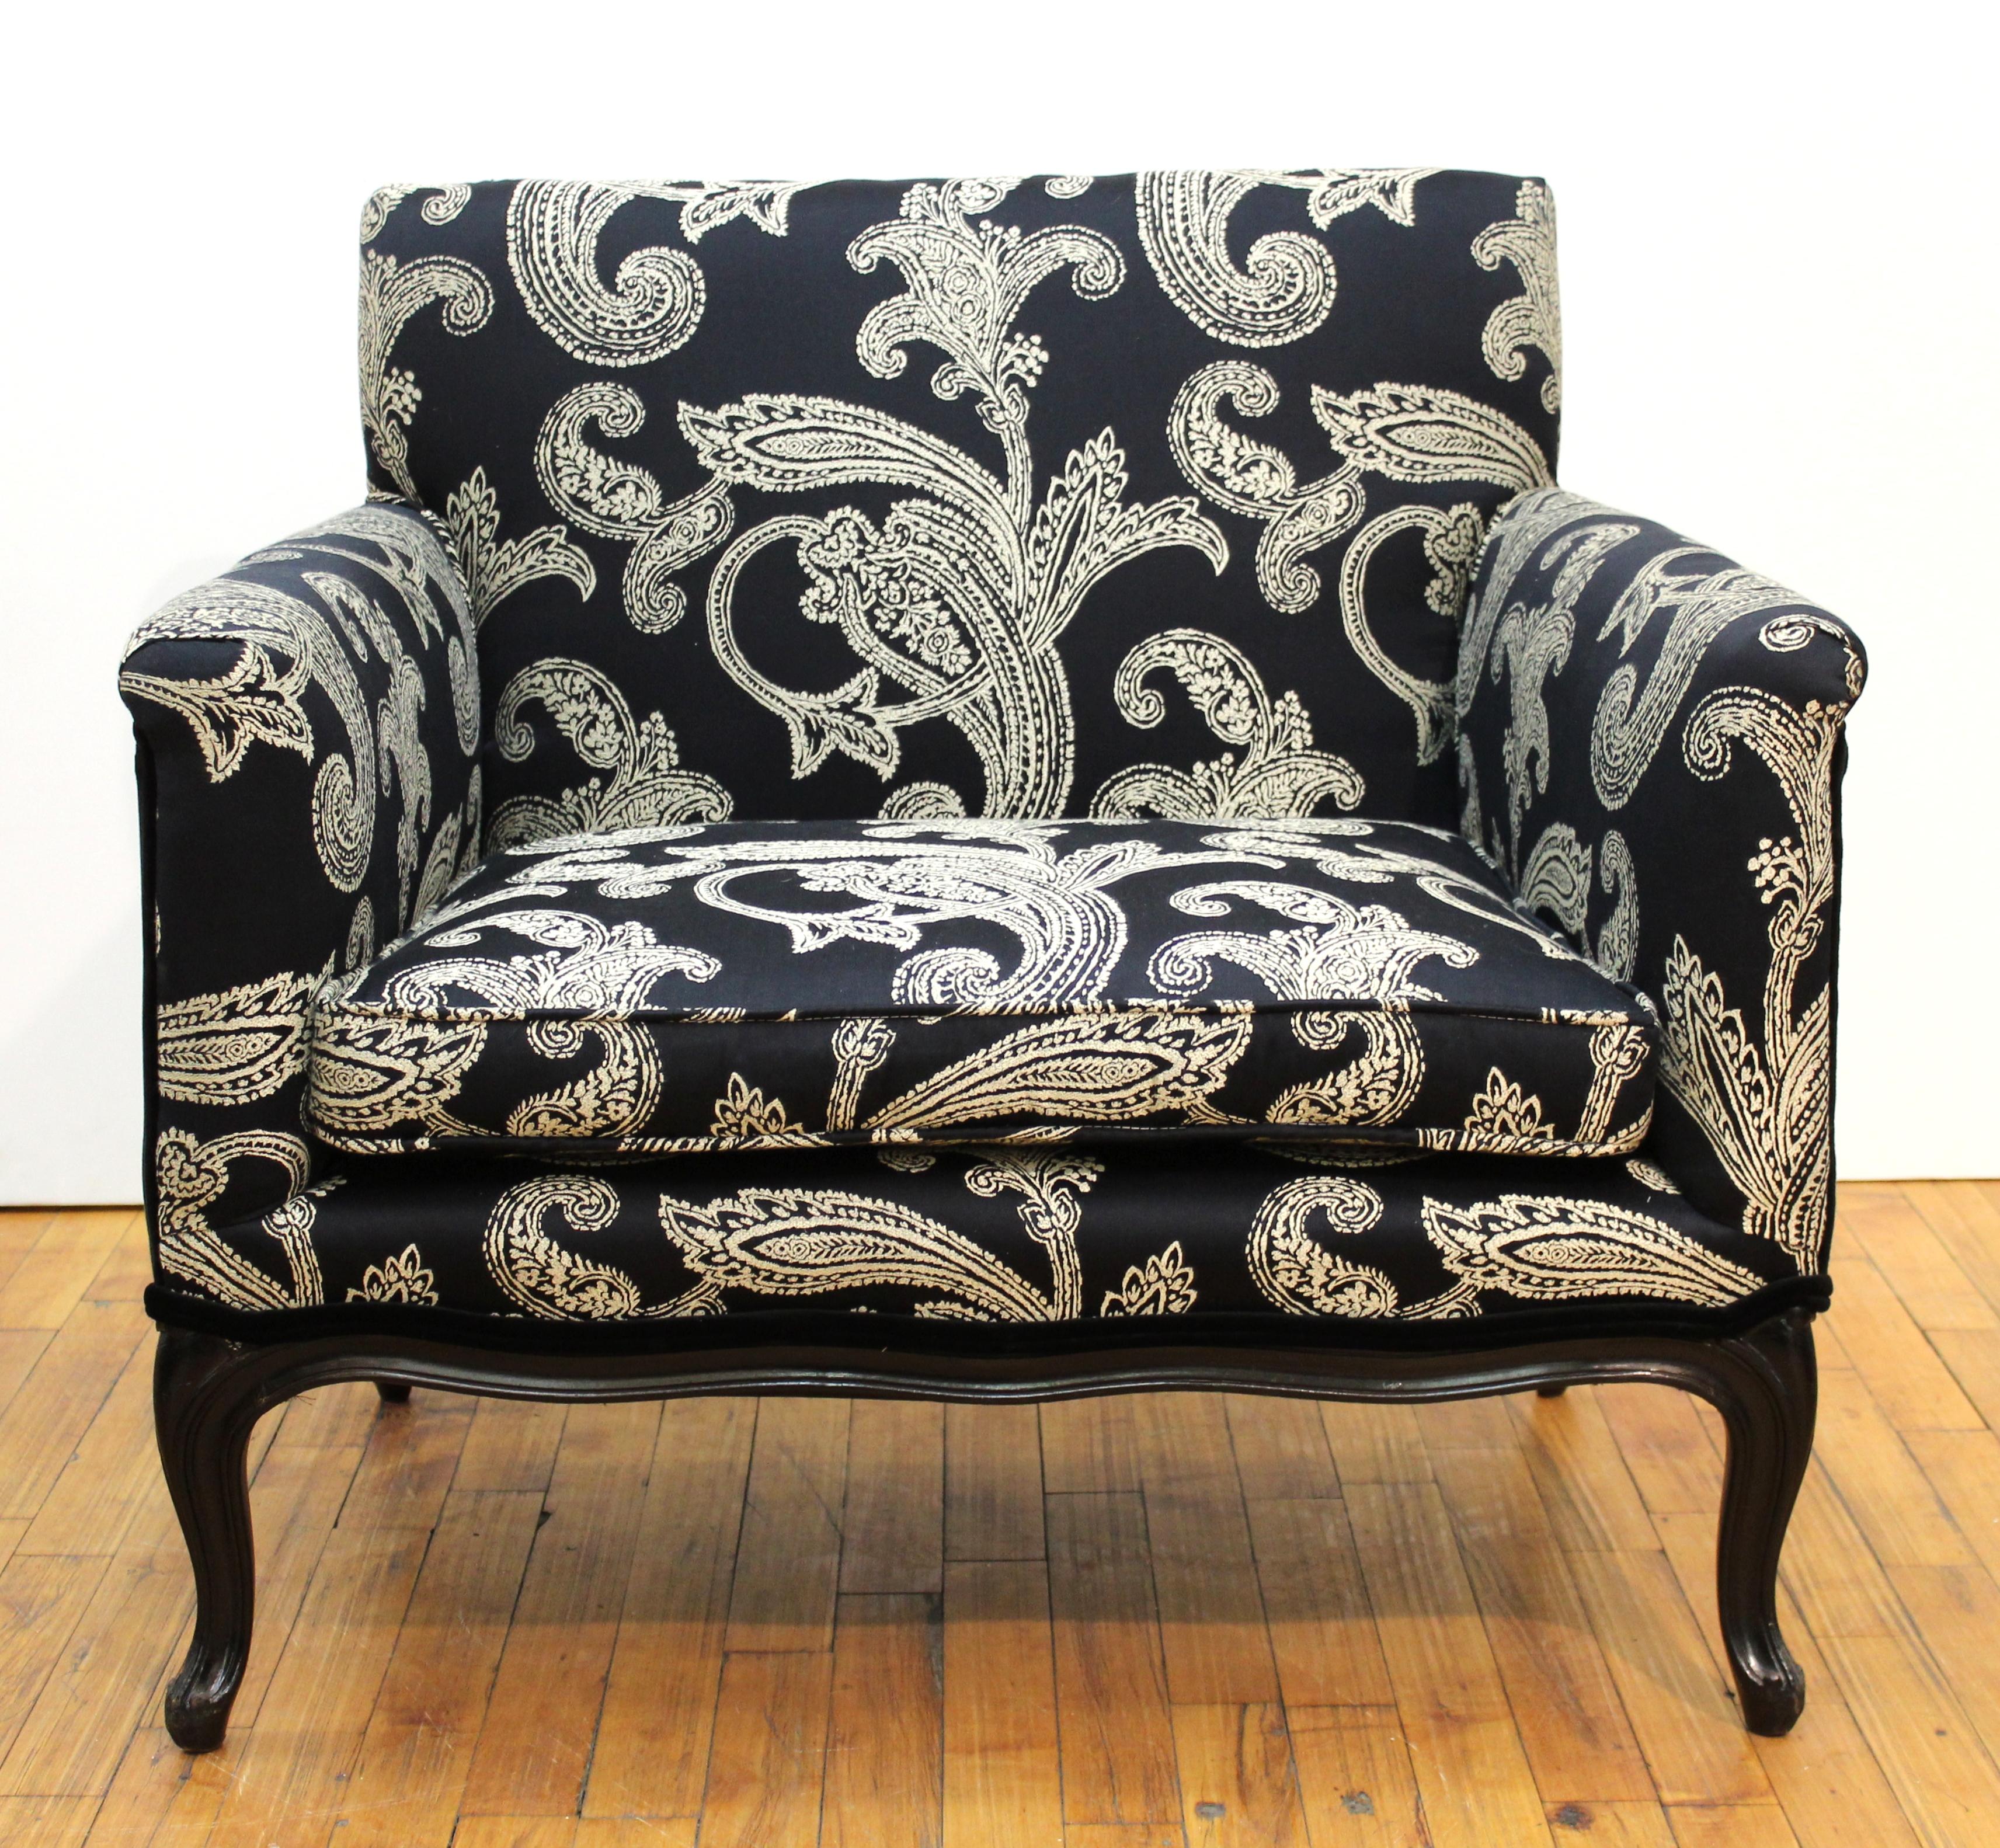 Mid-Century Modern pair of cube armchairs upholstered in black and cream Ralph Lauren paisley fabric. The chairs were made during the 1970s and the legs have been recently painted black. In great vintage condition.